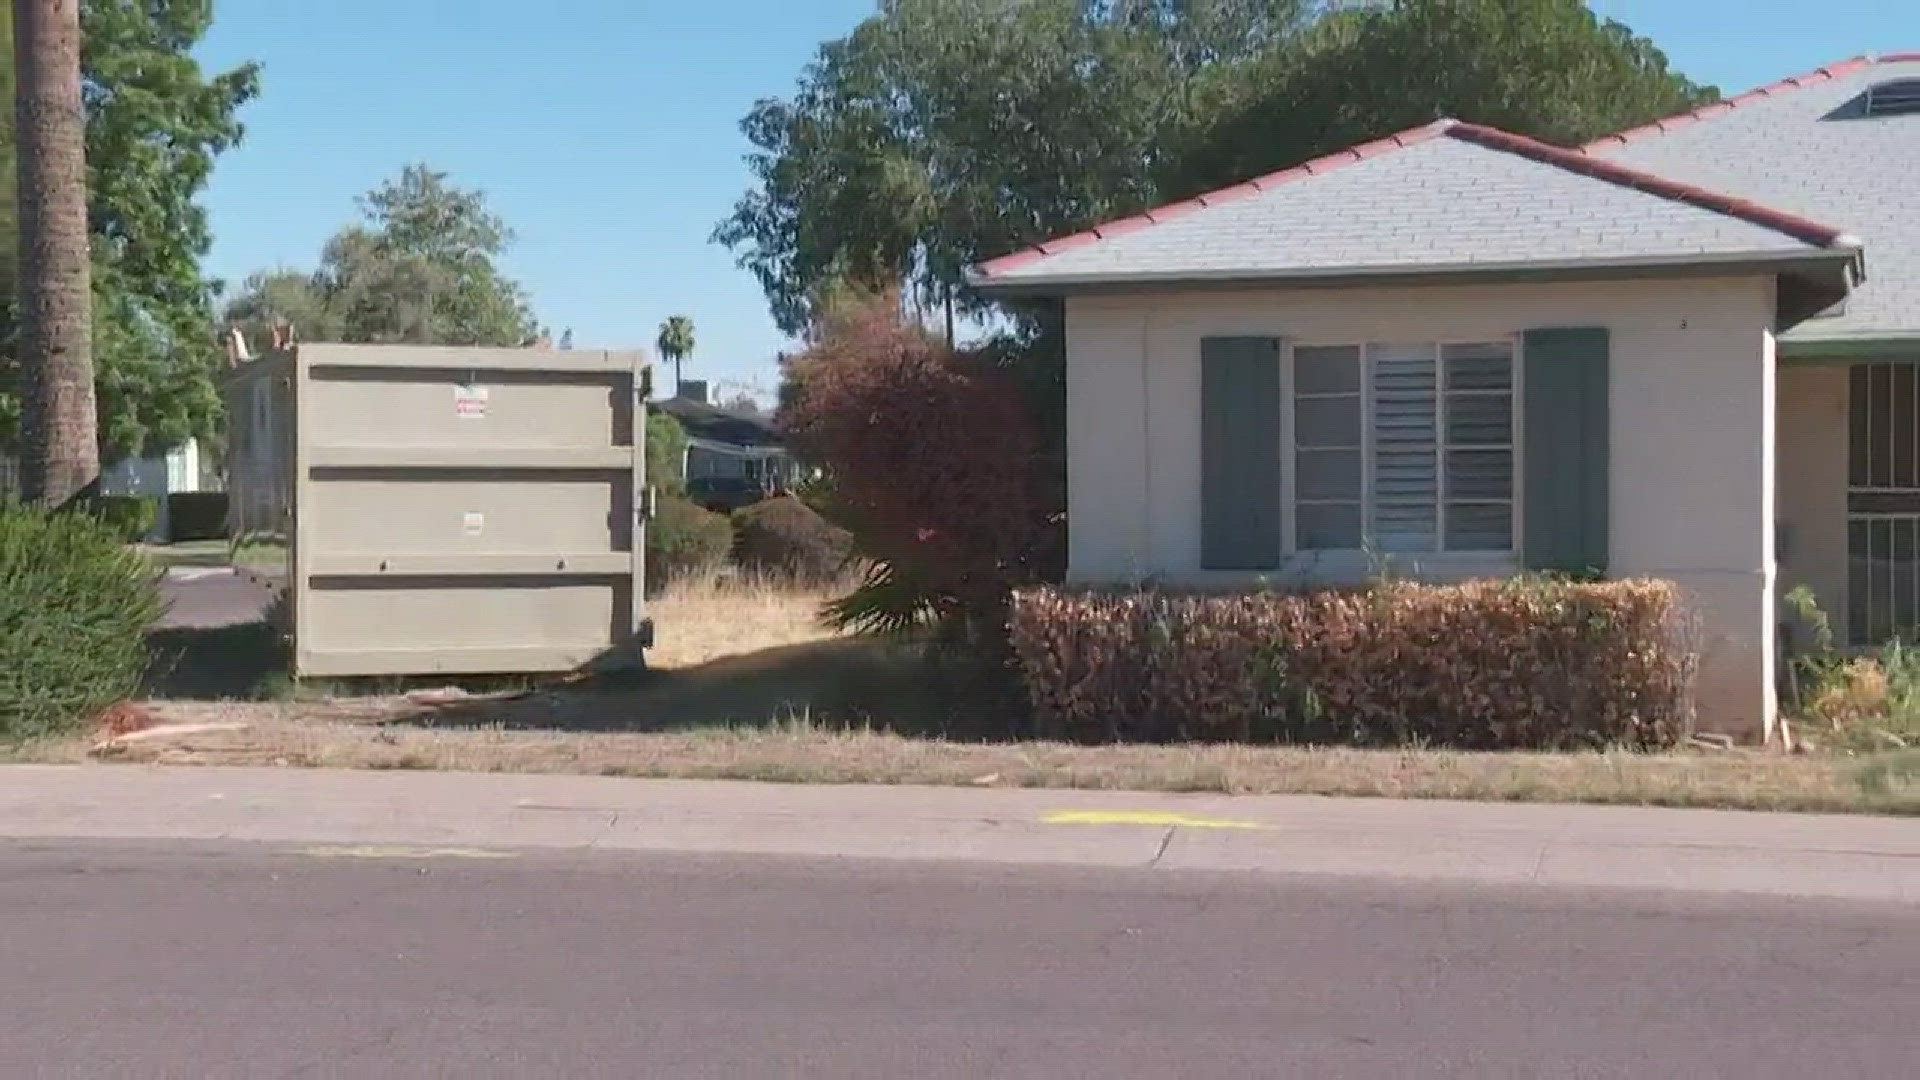 An industrial sized dumpster sitting in the front yard of a home on the corner of 17th Avenue and Flower Street.